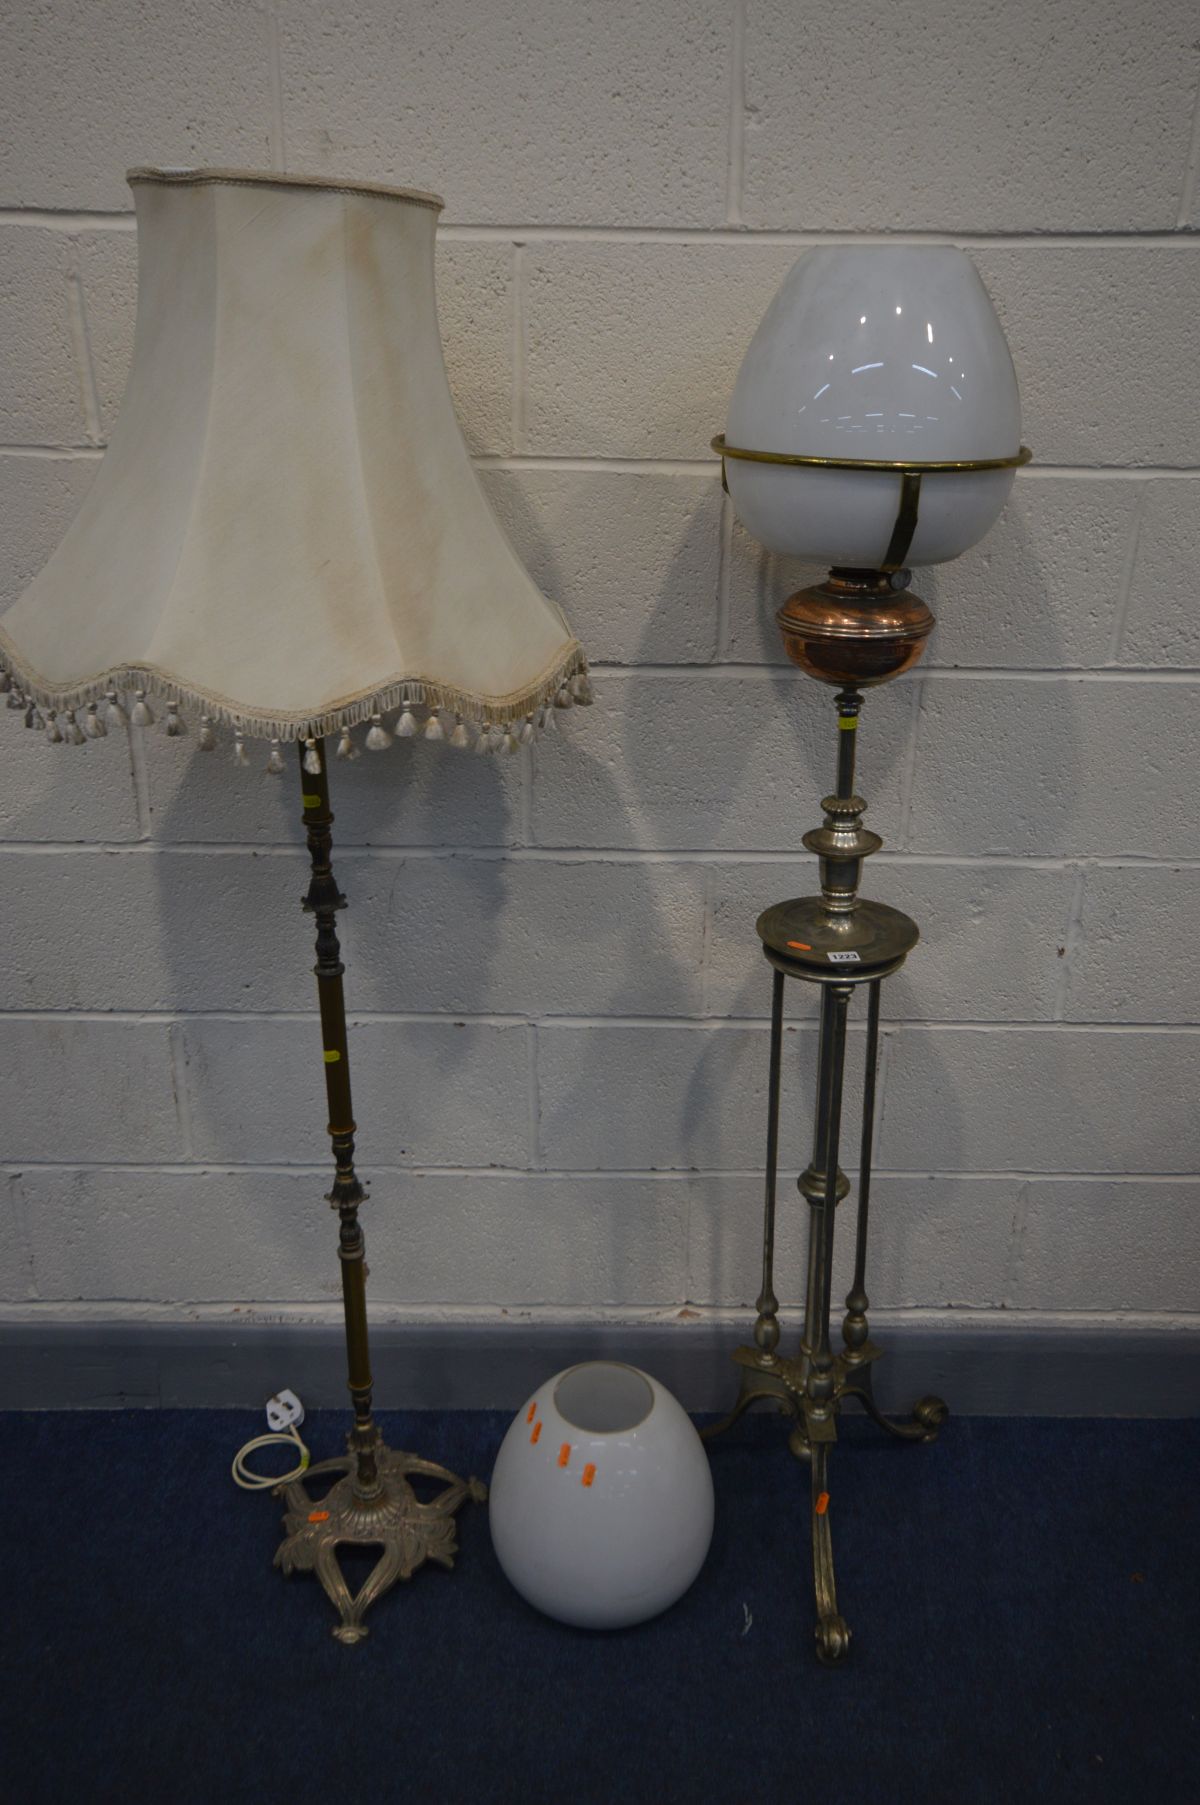 A TELESCOPIC OIL LAMP, white glass shade, brass reservoir, min height 133cm x max height 198cm, with